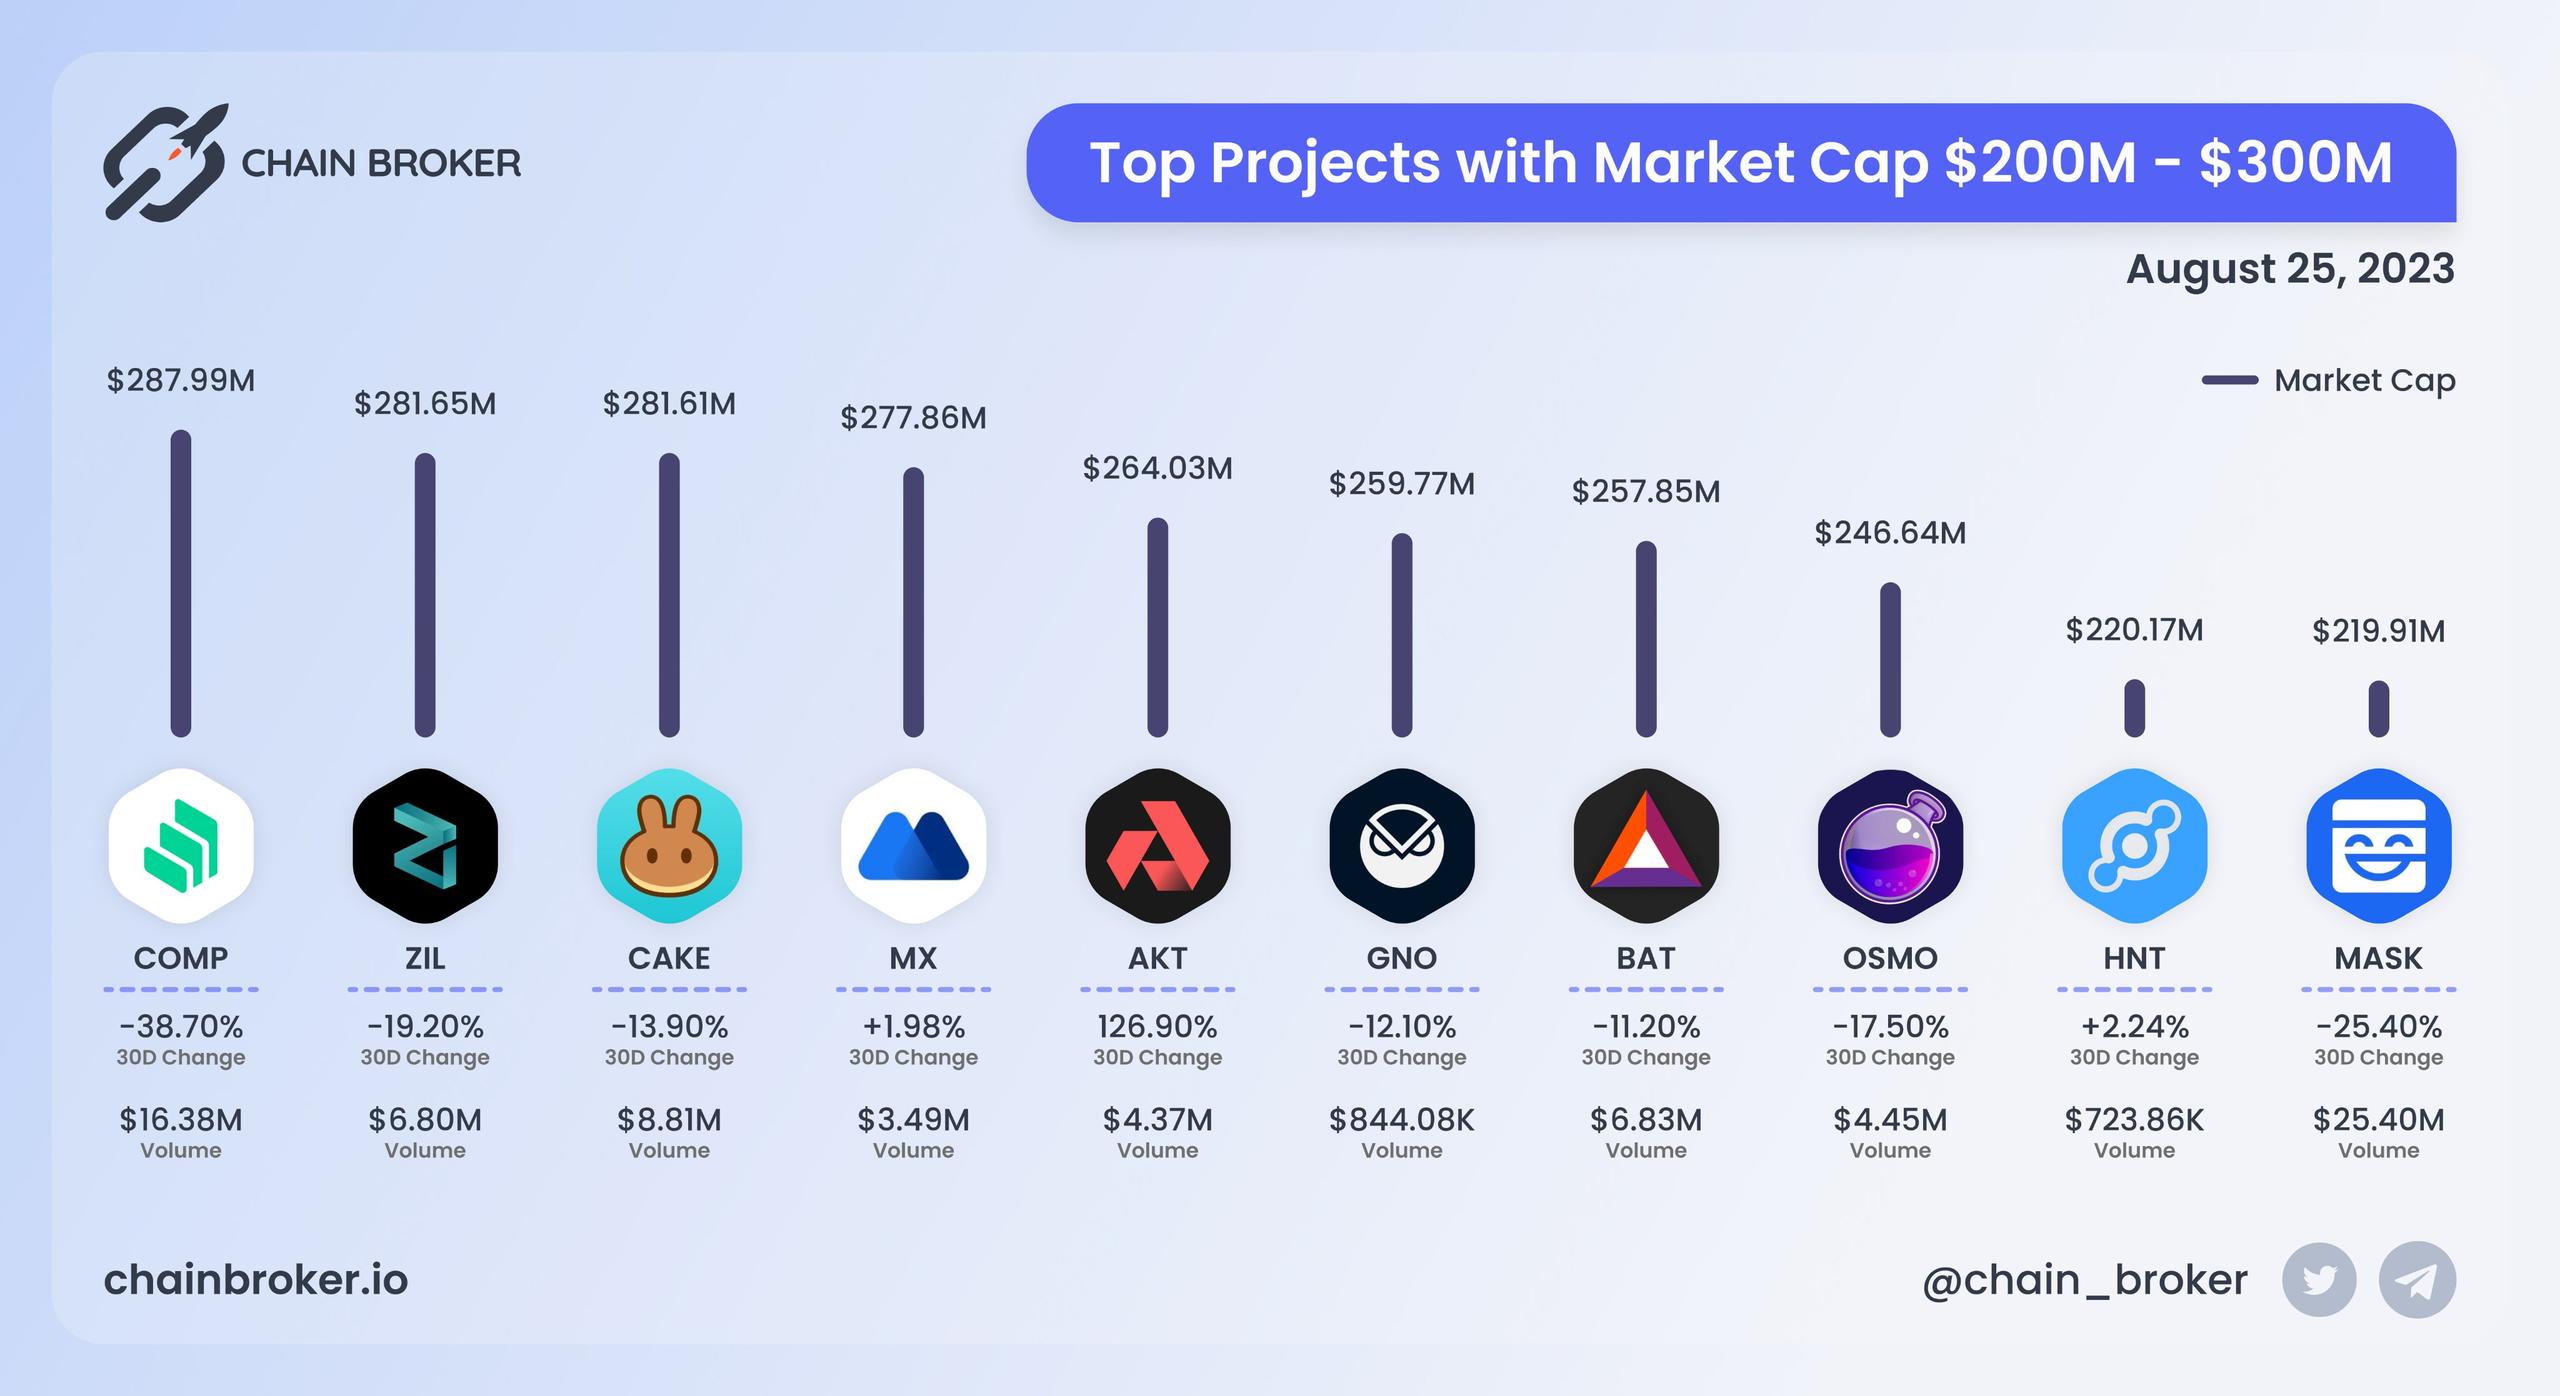 Top projects with Market Cap $200M - $300M